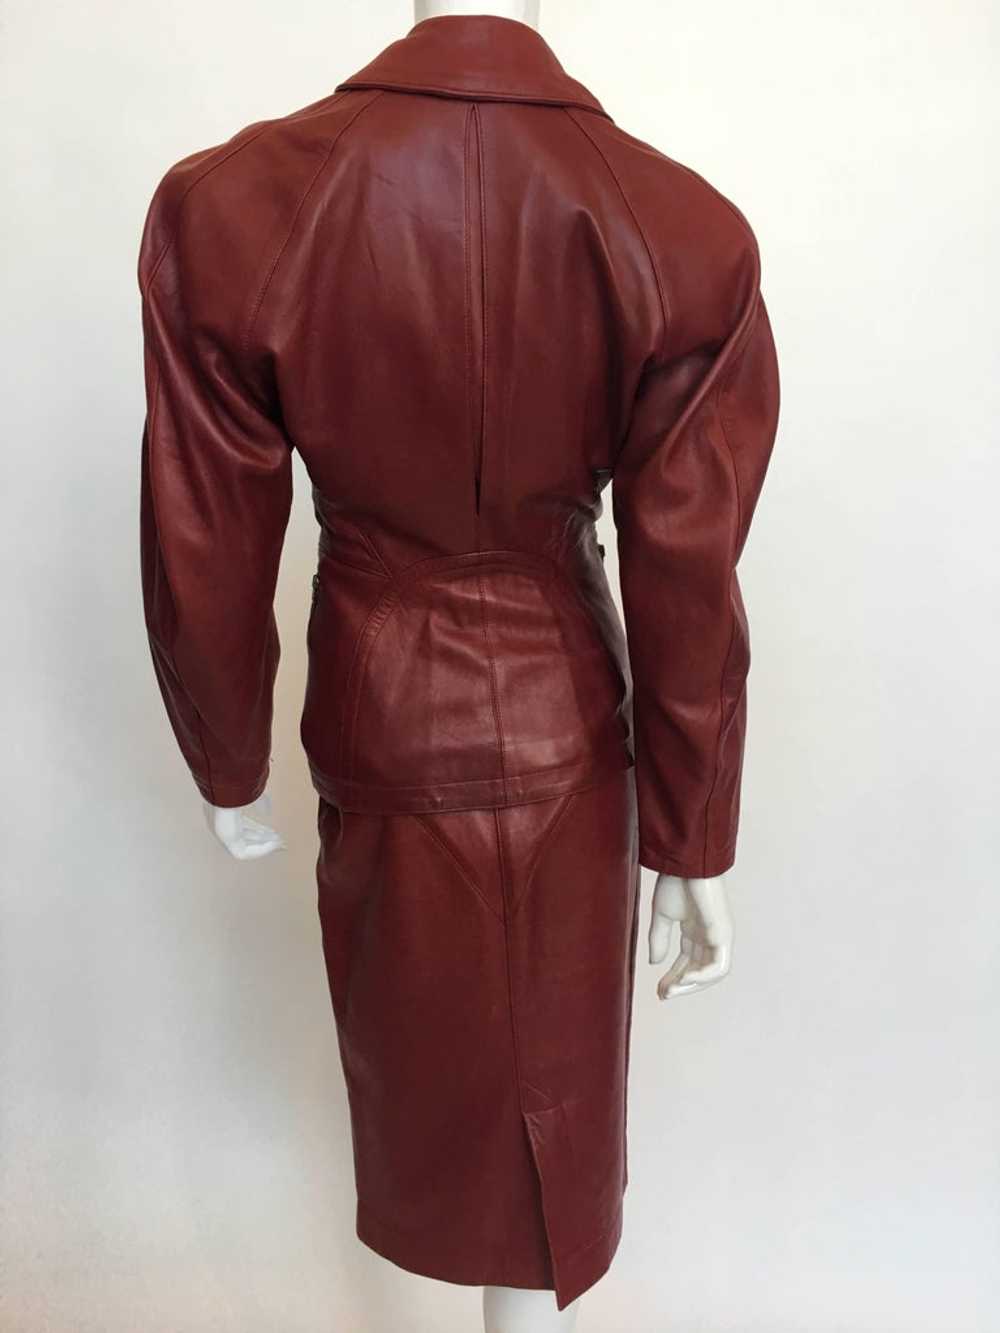 Alaïa 1980's Red Leather Skirt Suit - image 5